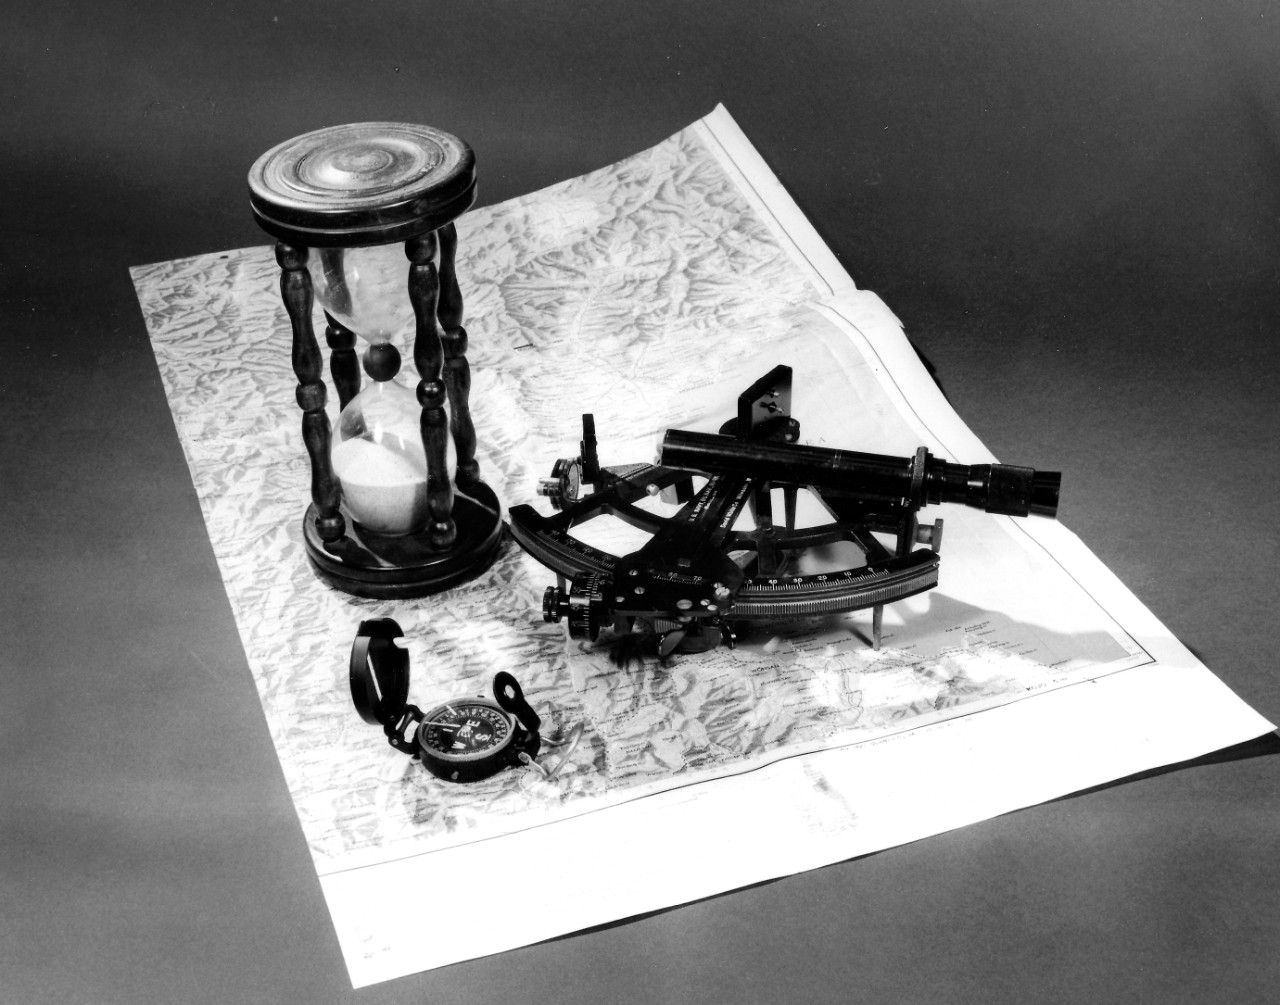 NMUSN-3105: Navigation Exhibit, 1980s. An hourglass, sextant, compass, and map are shown. National Museum of the U.S. Navy Photograph Collection.